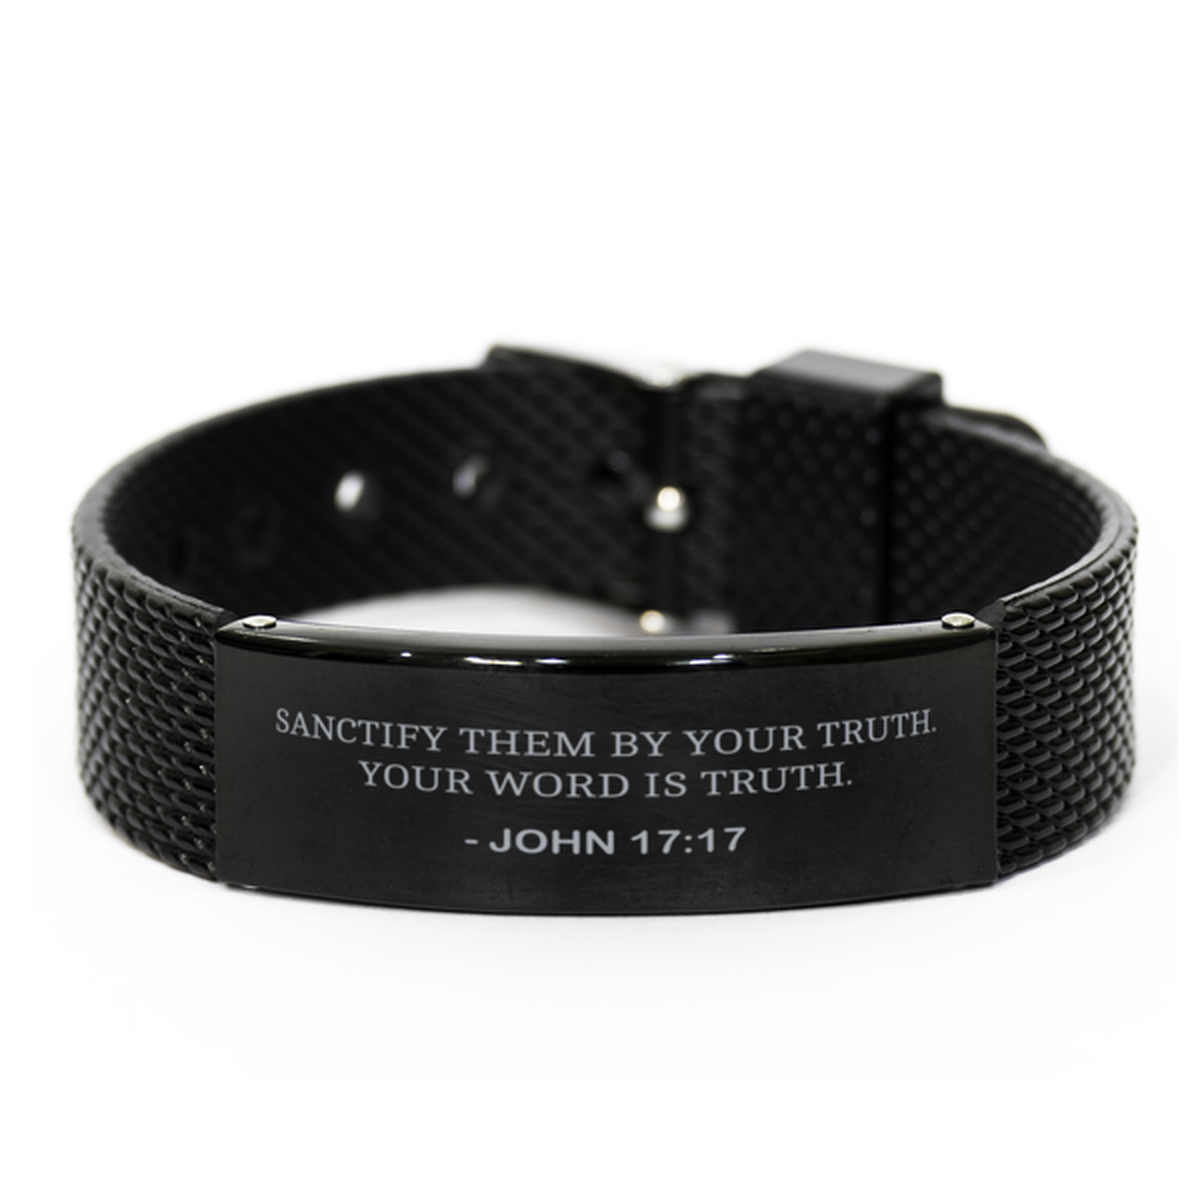 Christian Black Bracelet,, John 17:17 Sanctify Them By Your Truth. Your Word Is, Motivational Bible Verse Gifts For Men Women